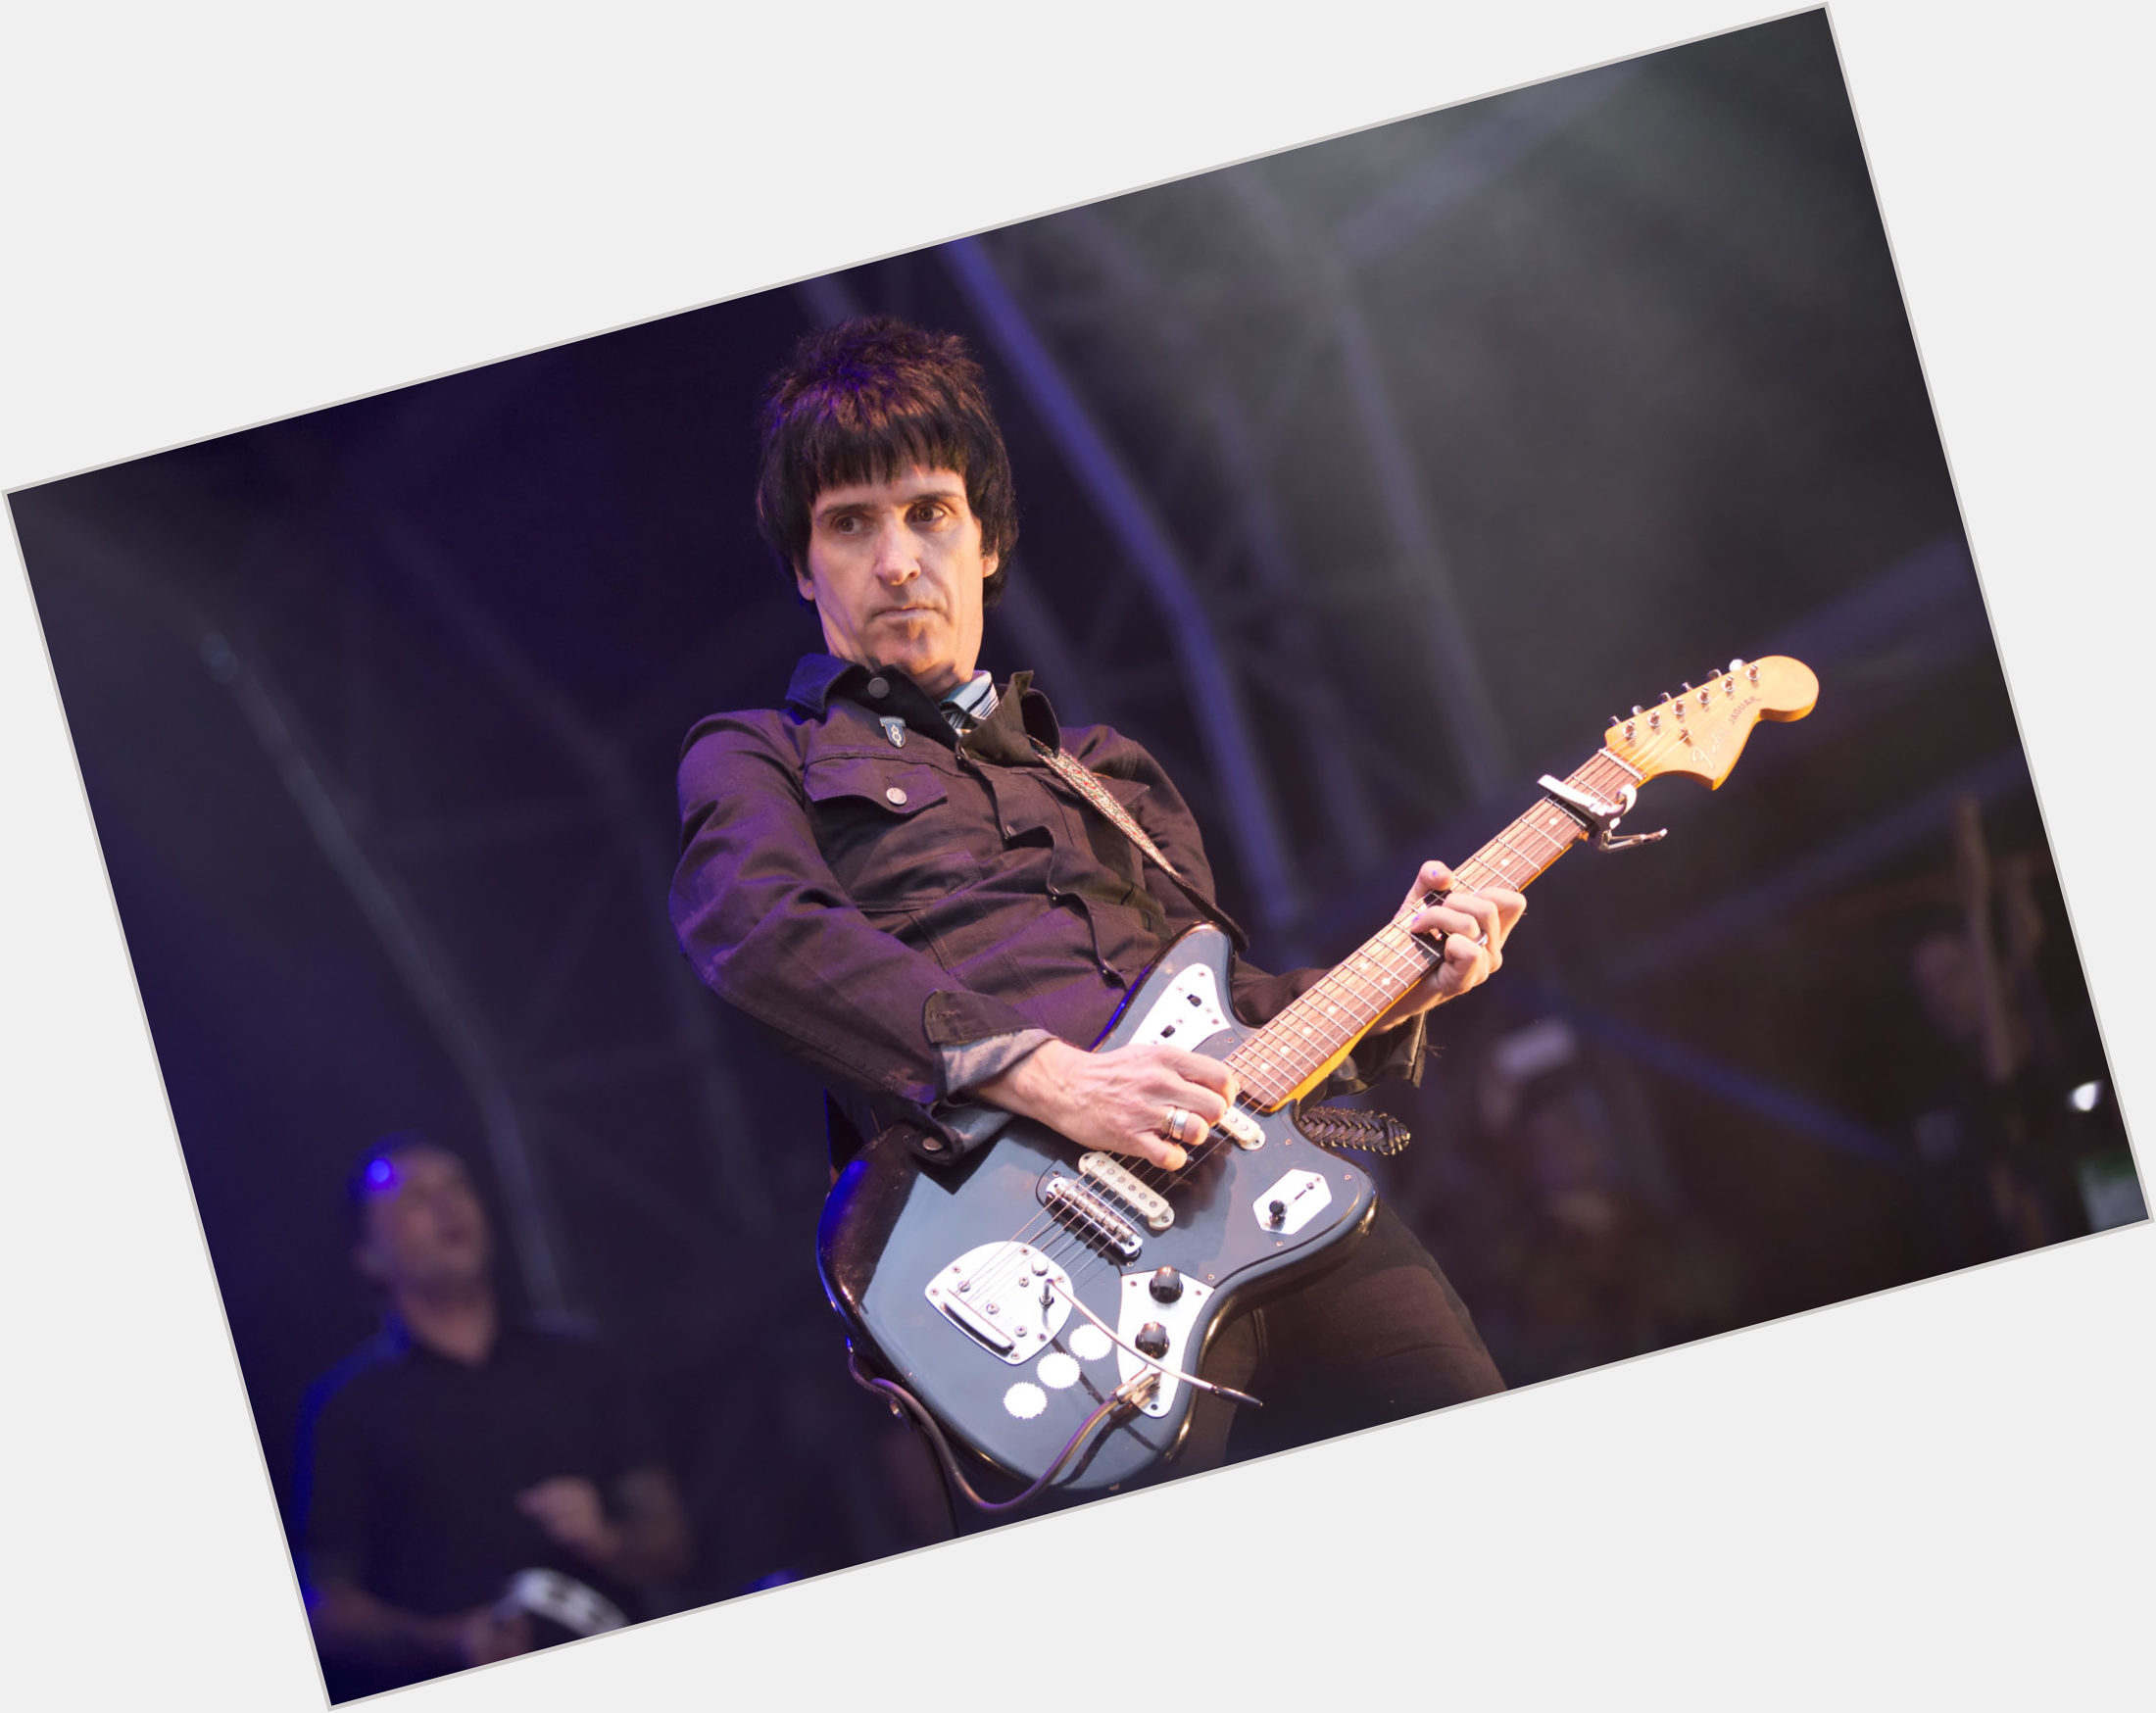 Johnny Marr dating 2